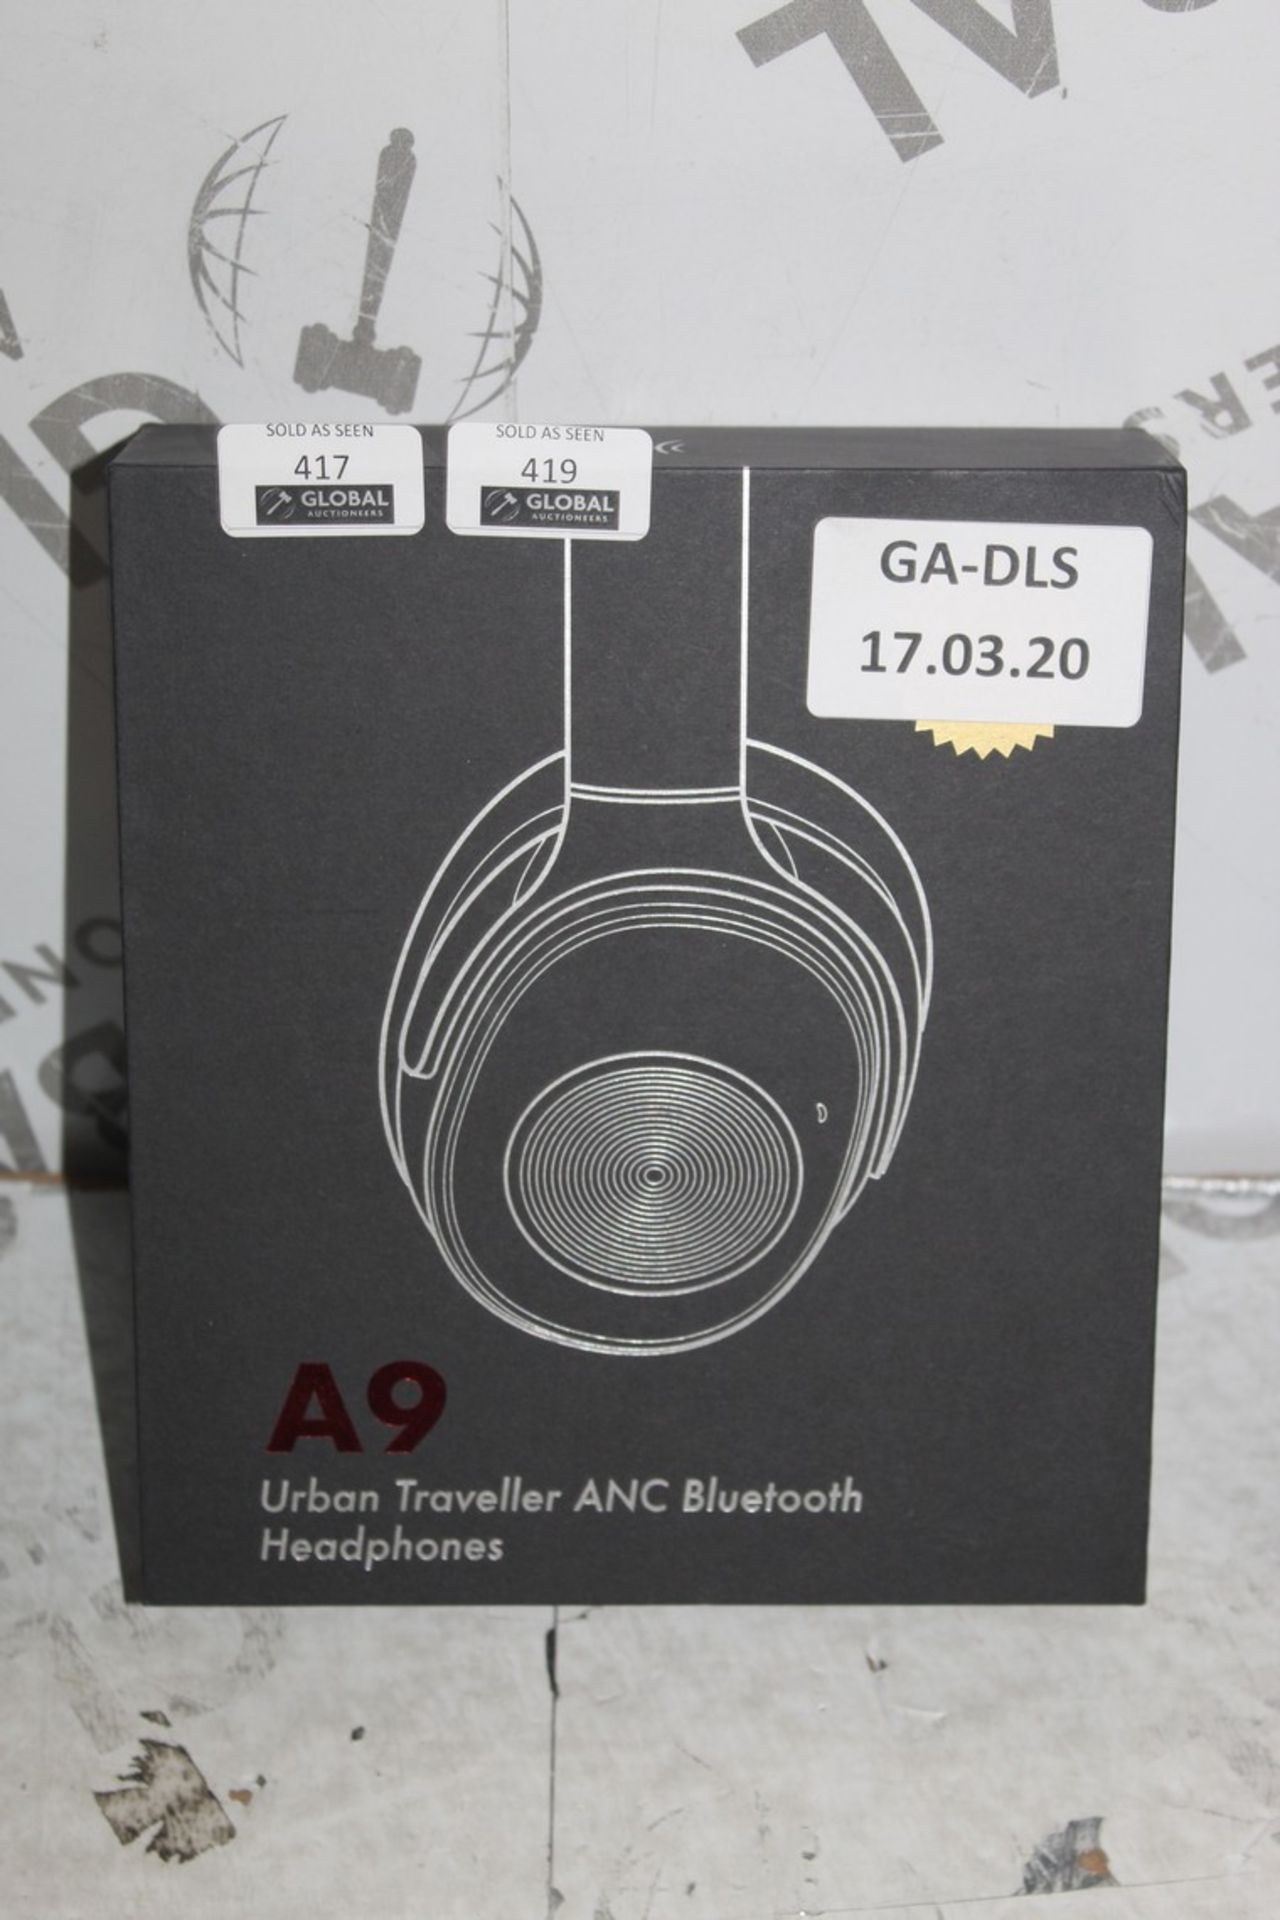 Boxed Brand New Paif Of A9 Urban Traveller ANC Blu